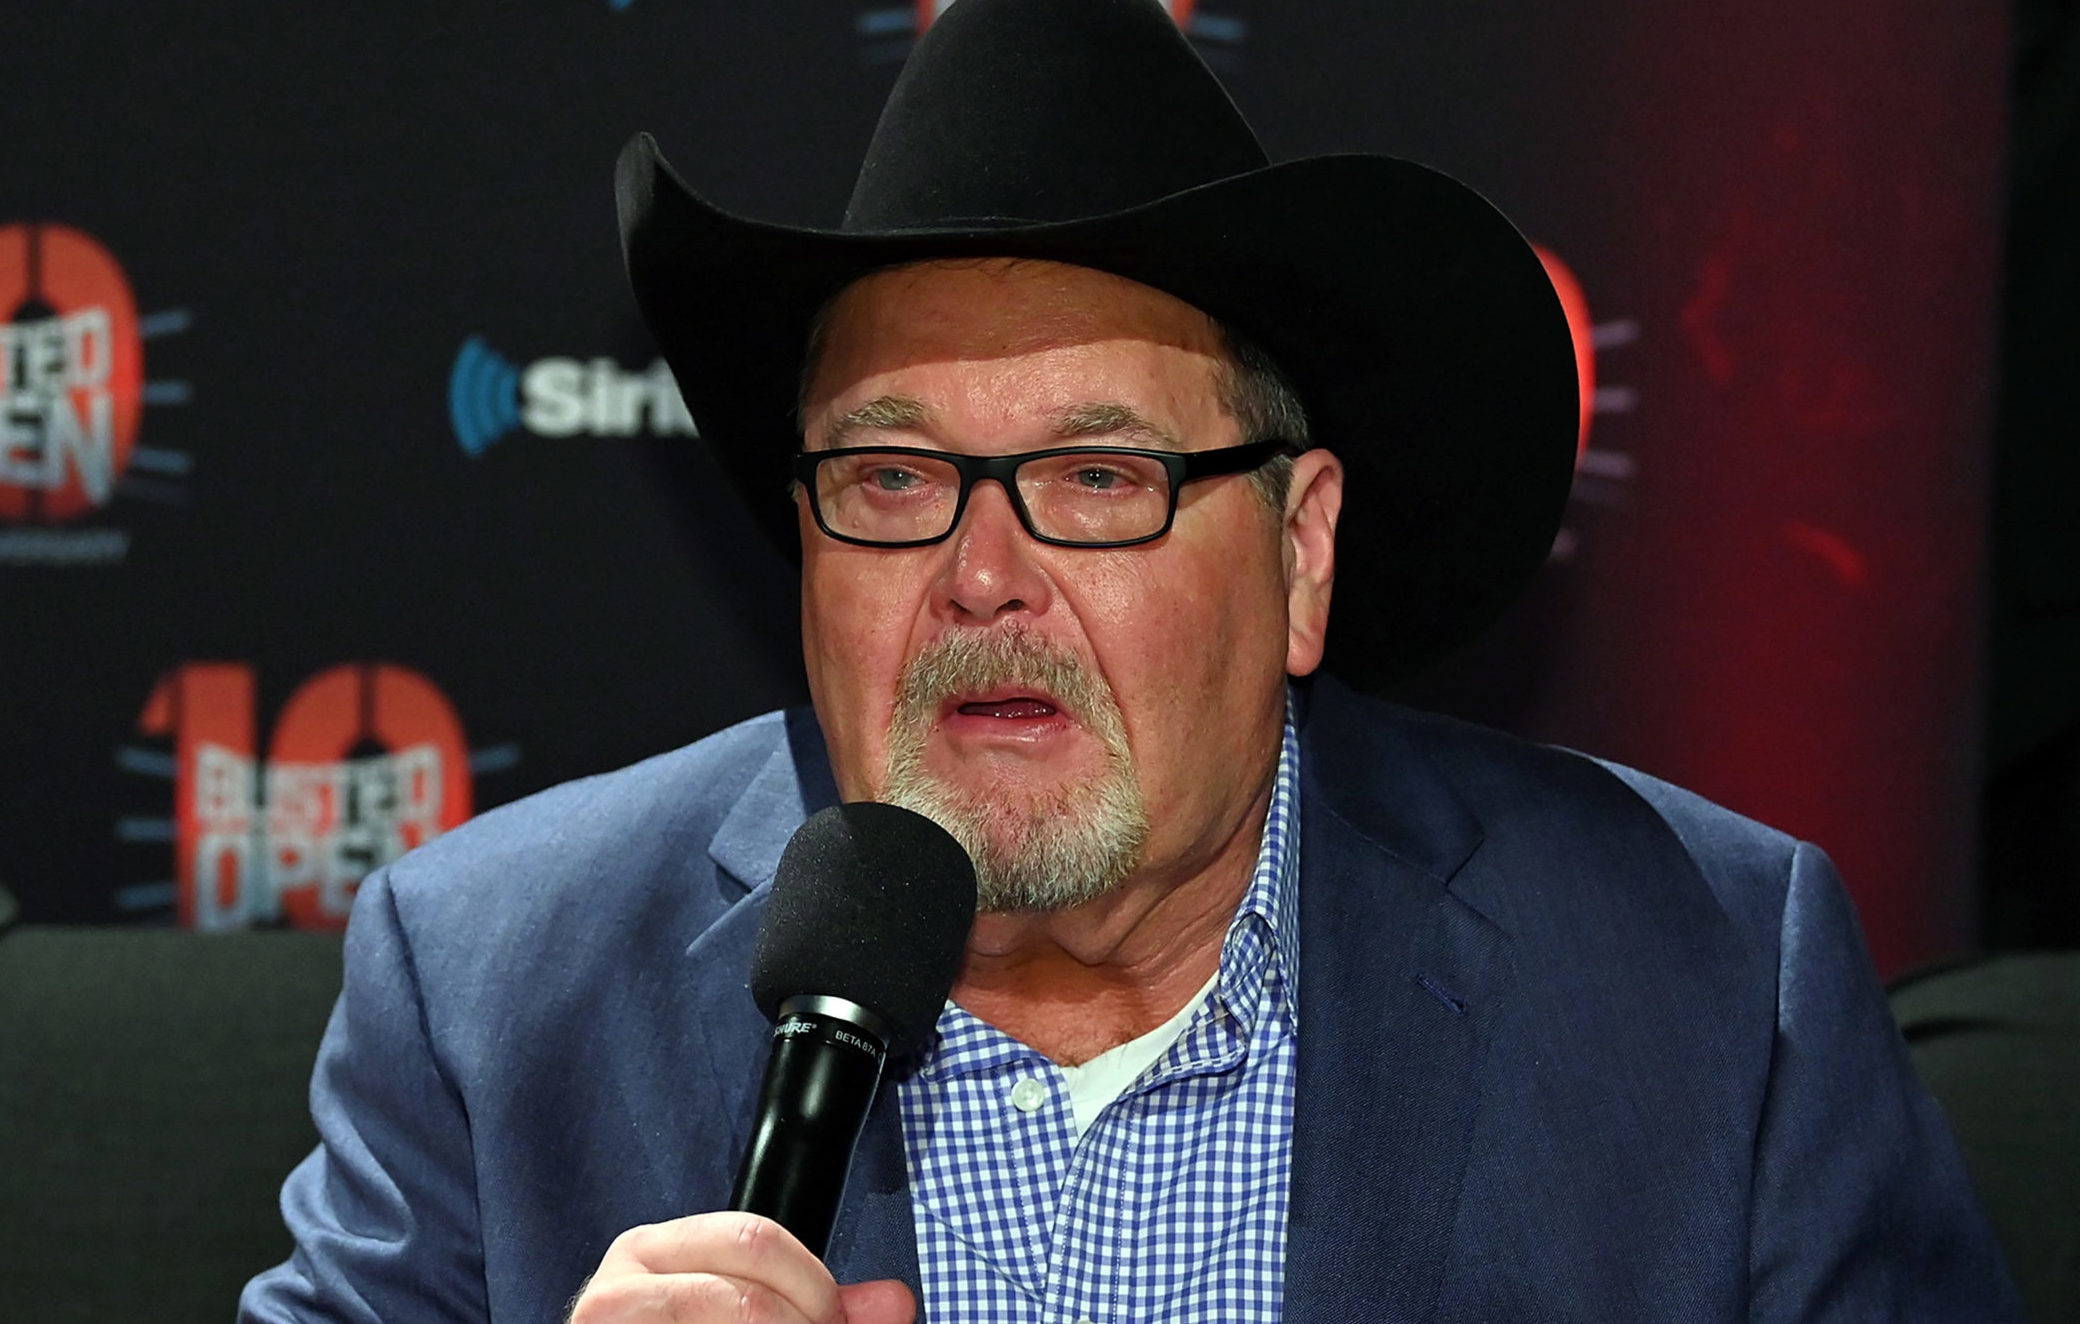 Jim Ross Provides an Update on His AEW Contract Situation